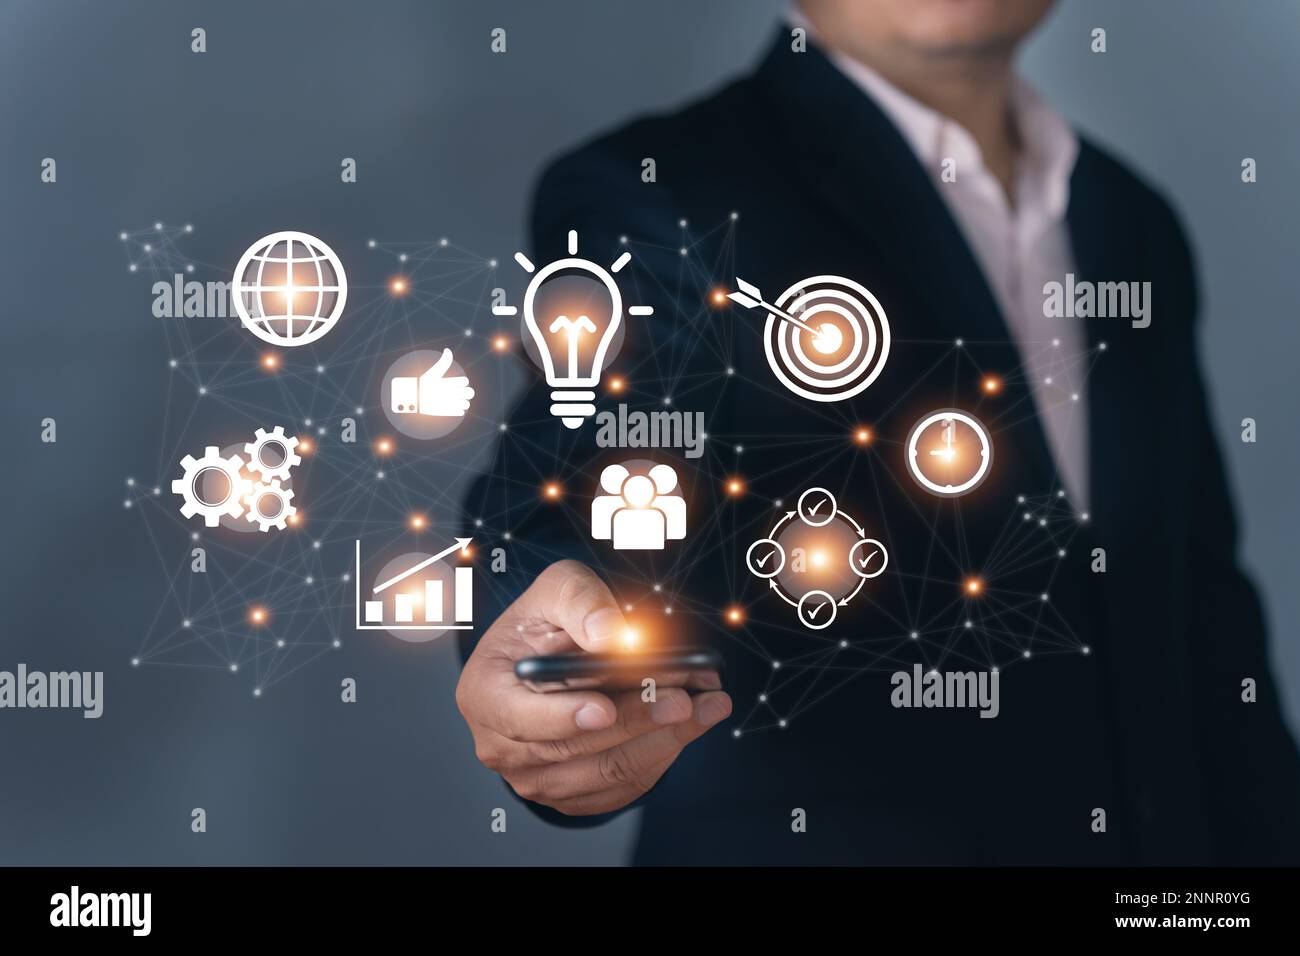 Businessman holding business elements icons on screen. Technology and strategy Stock Photo